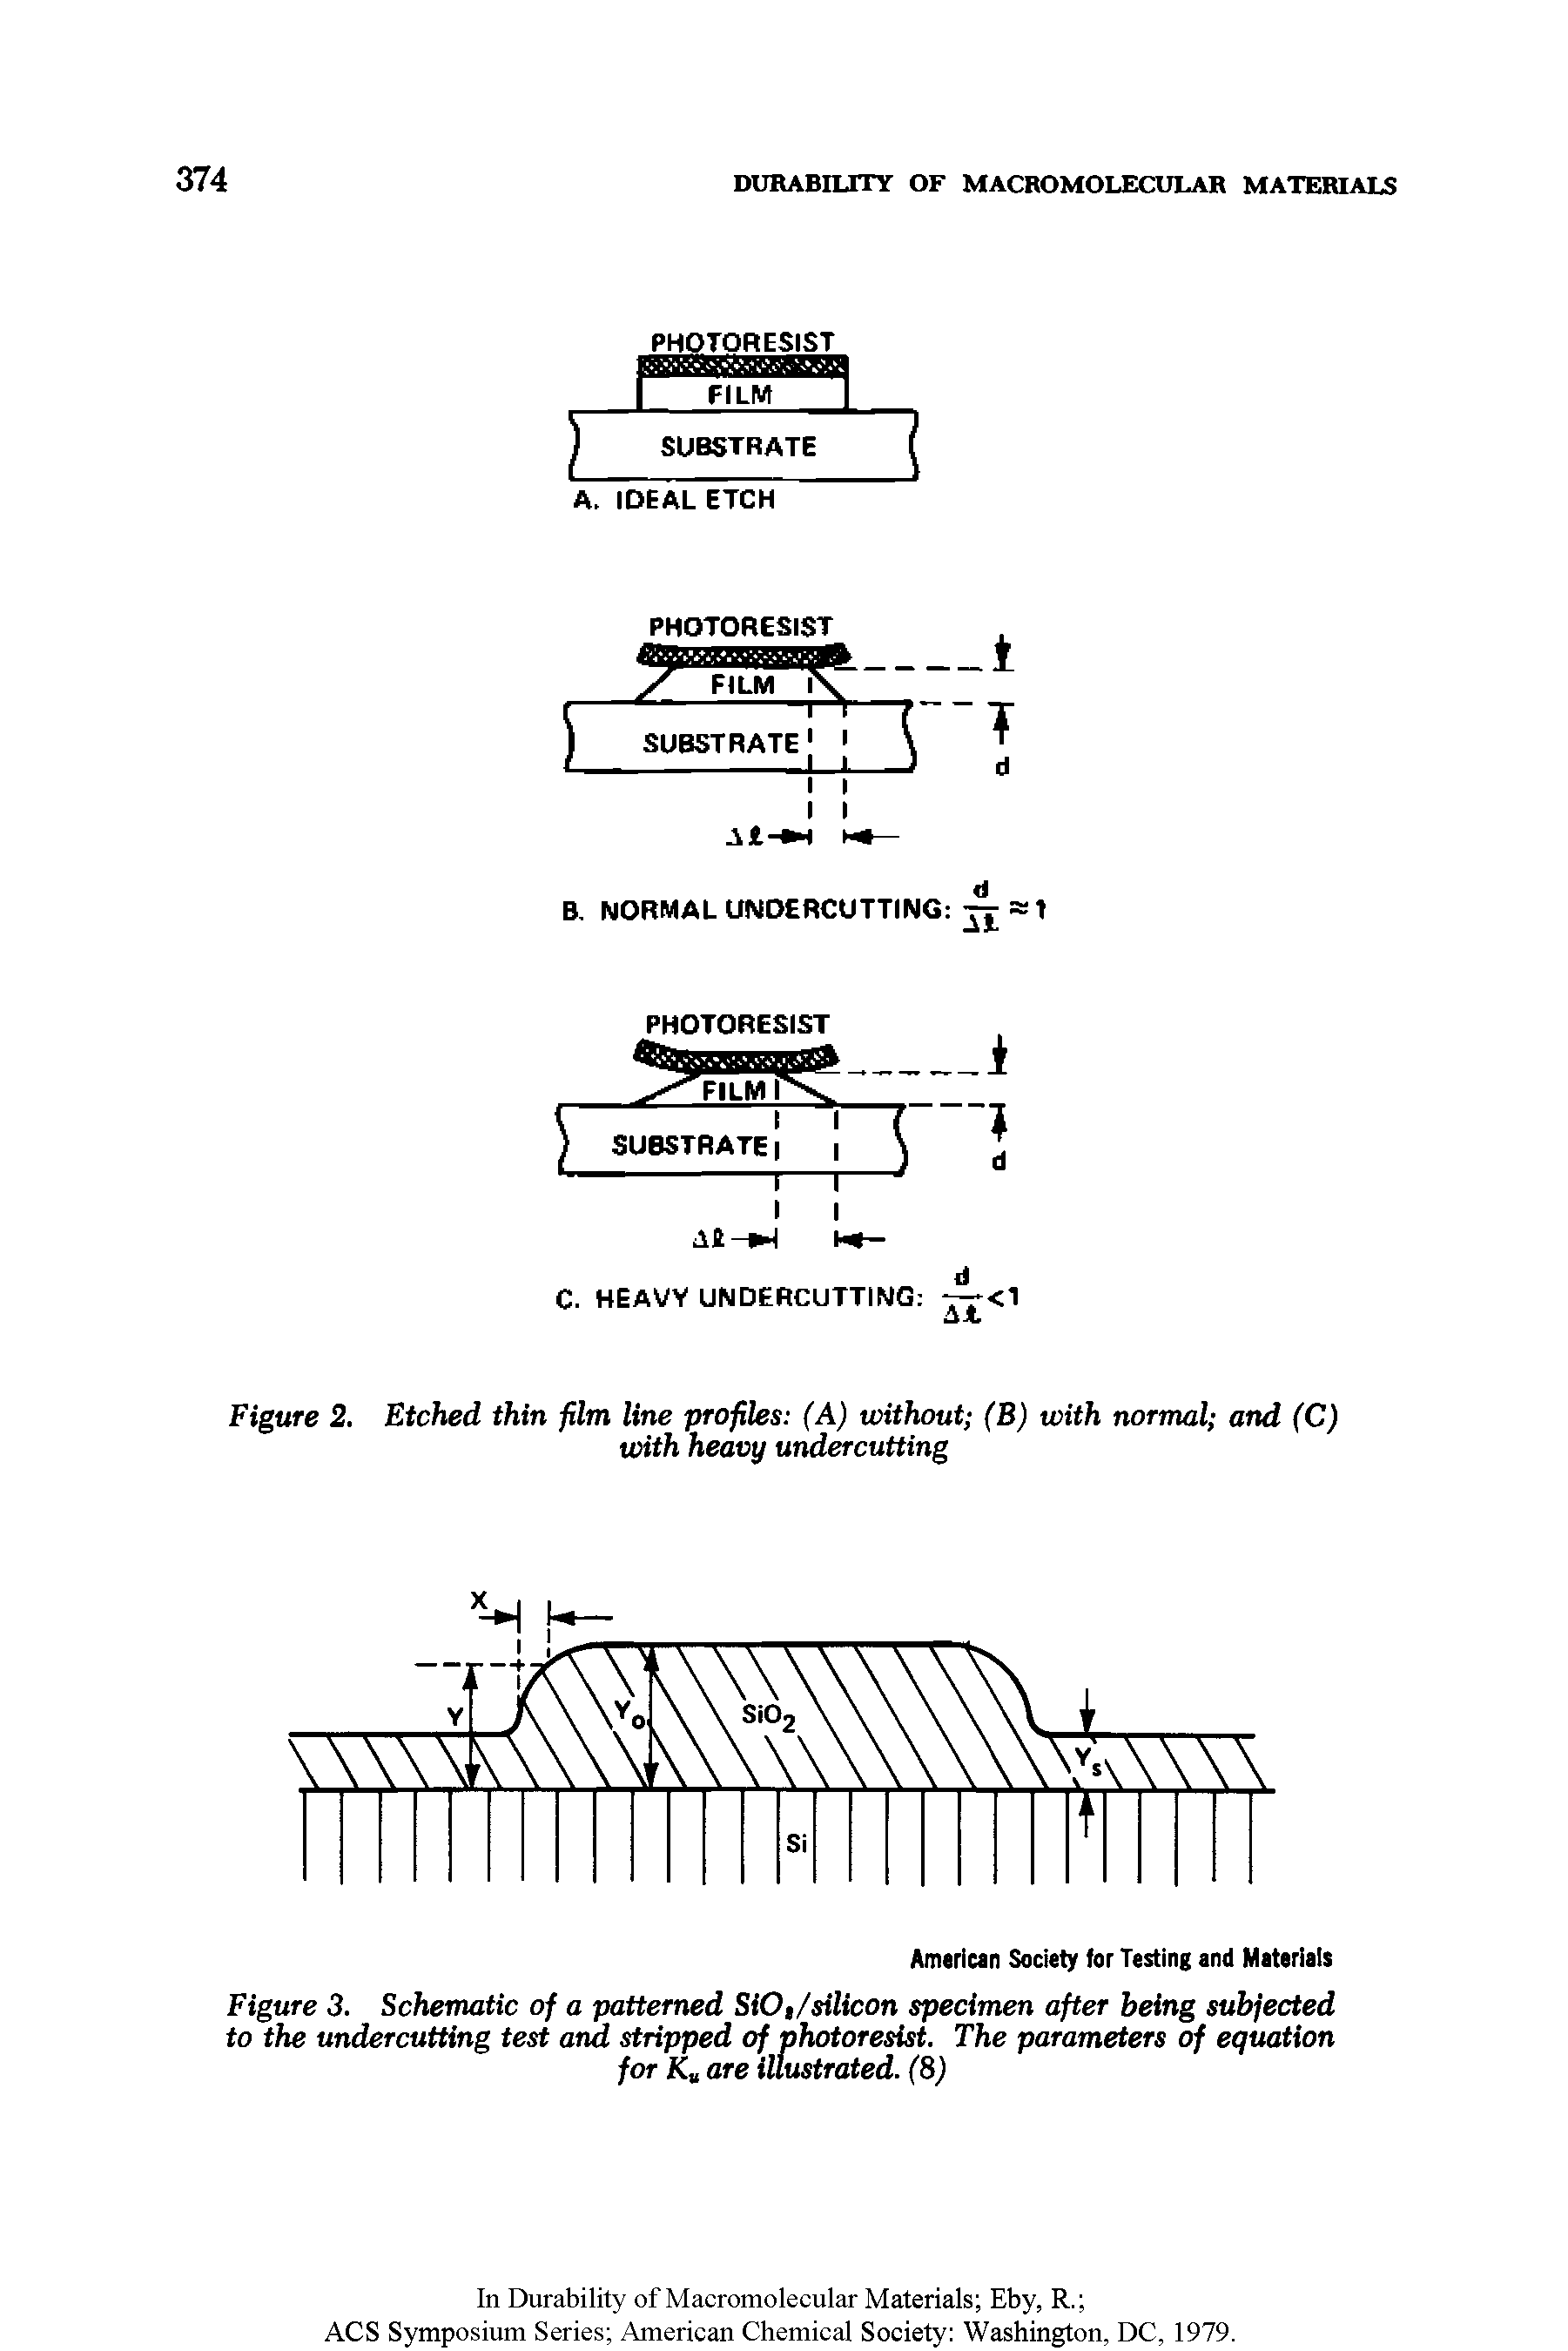 Figure 2. Etched thin film line profiles (A) without (B) with normal and (C) with heavy undercutting...